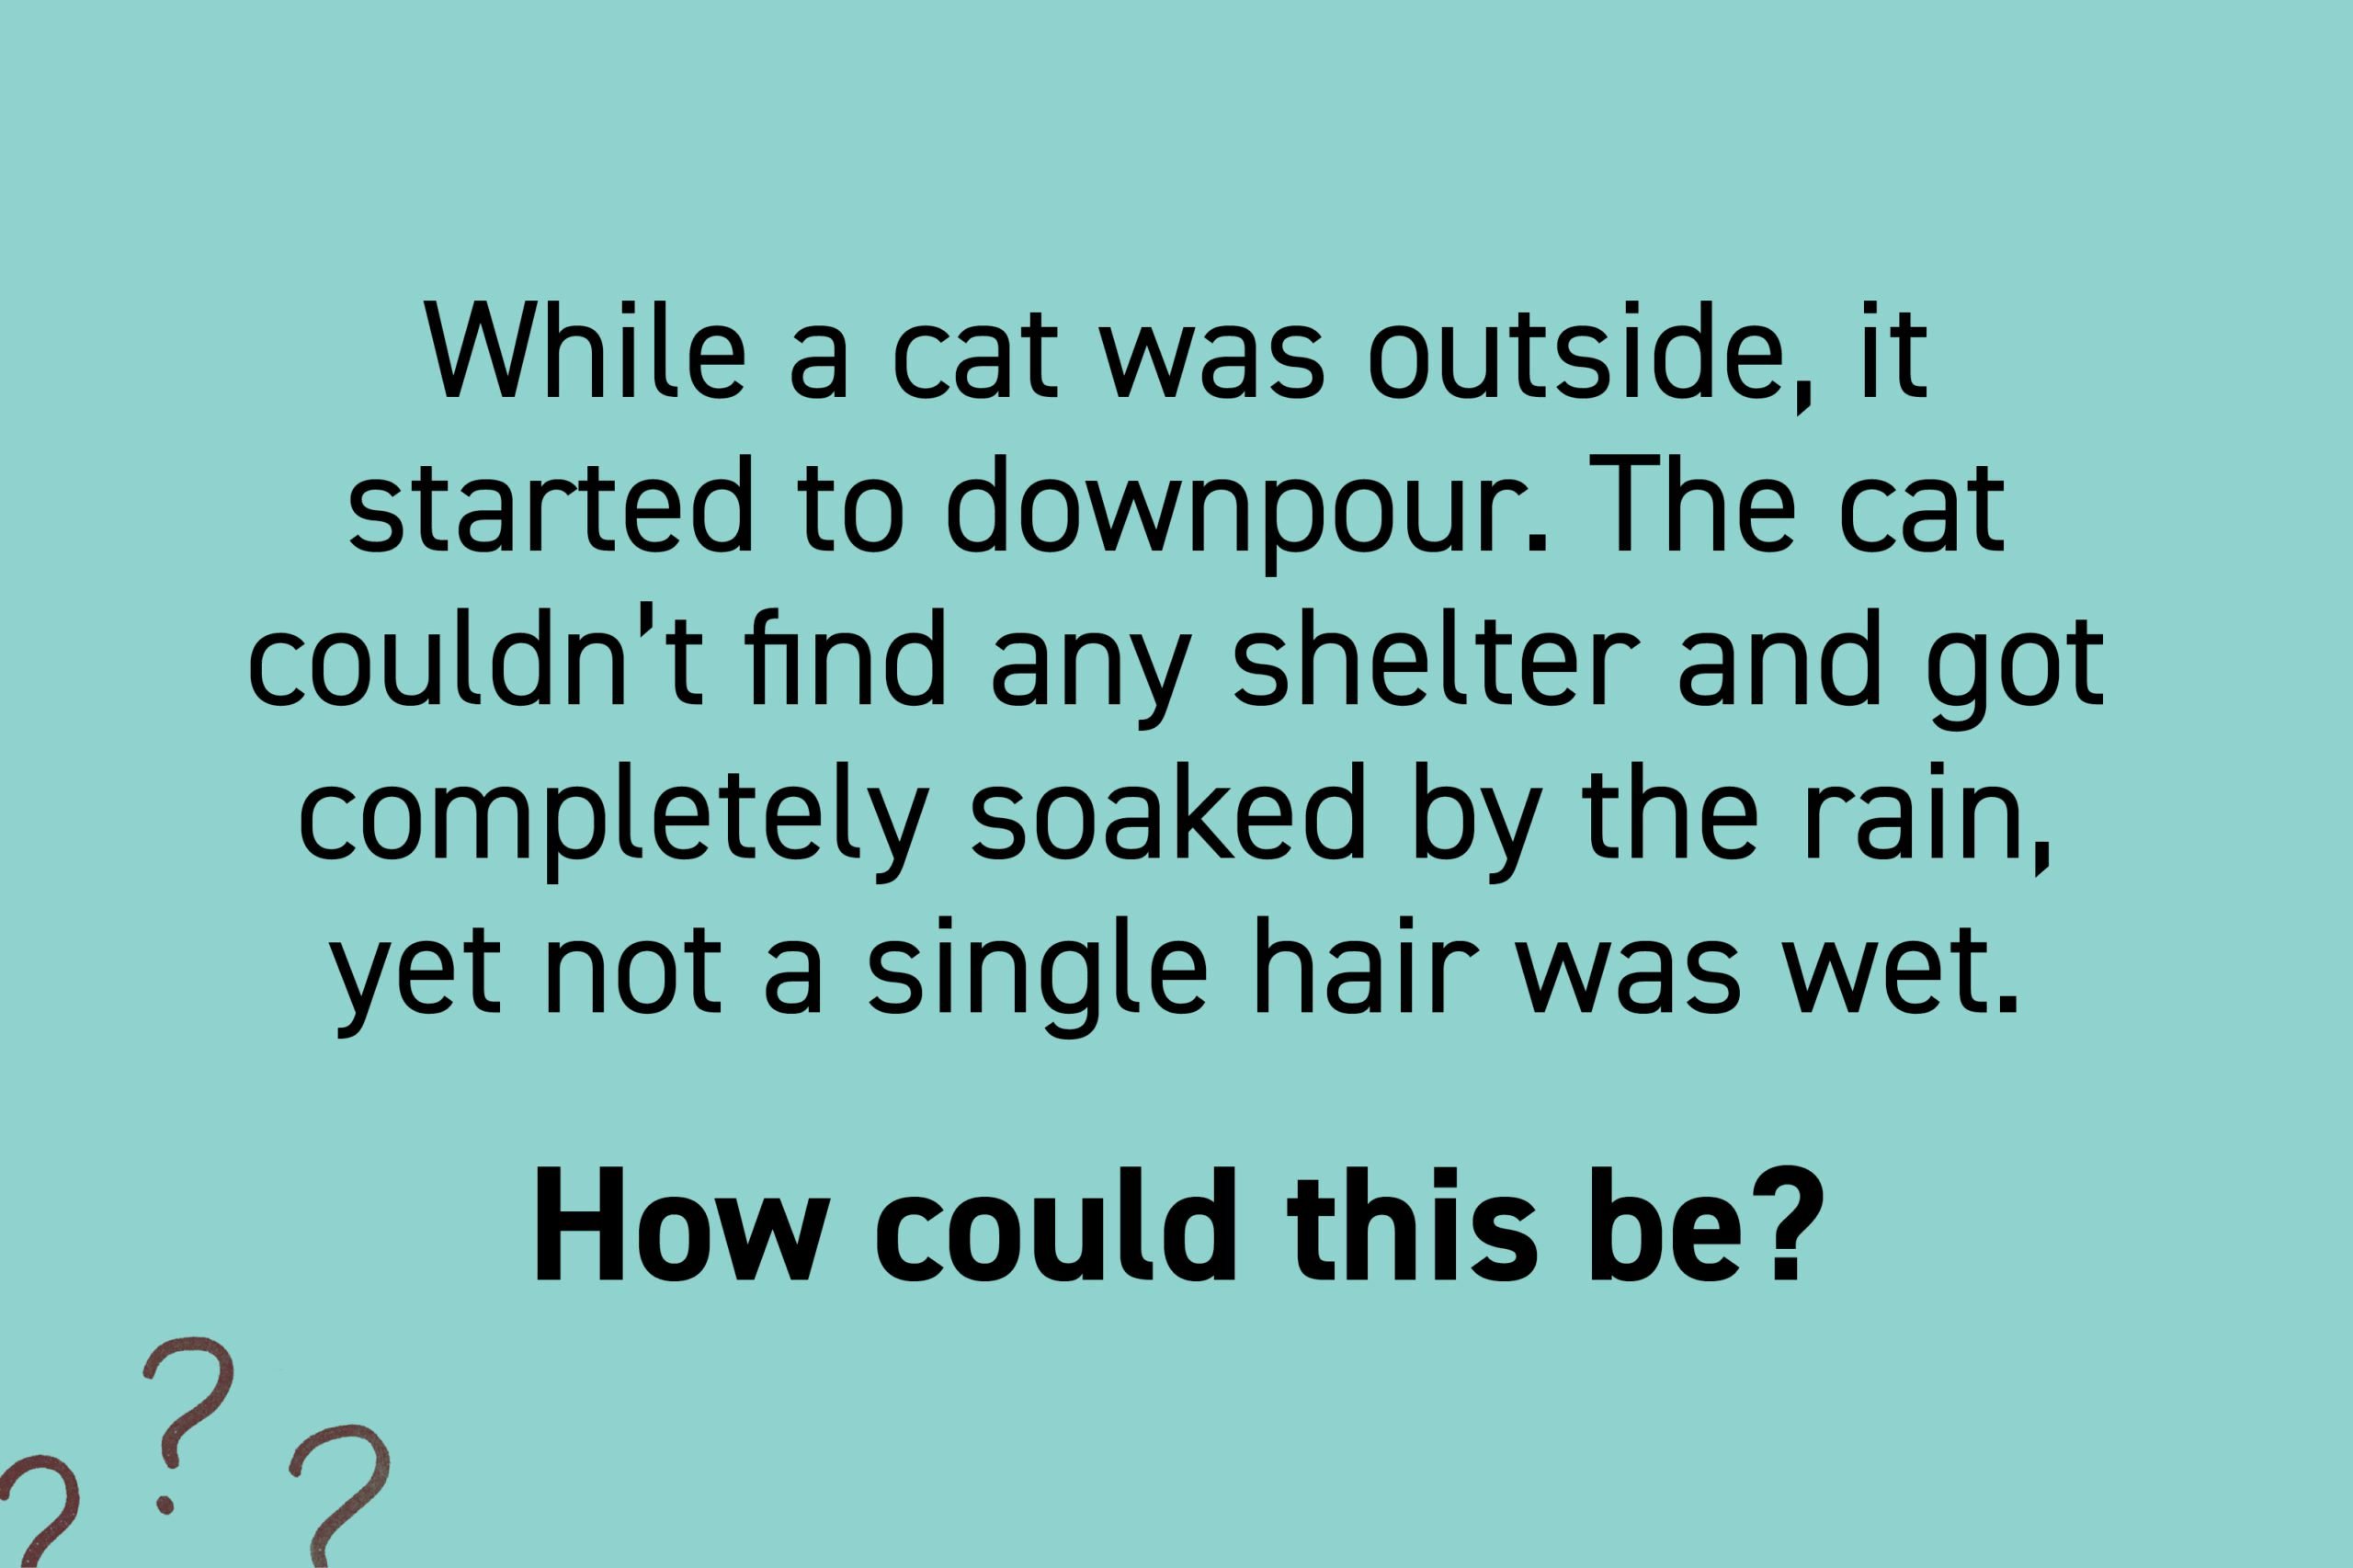 While a cat was outside, it started to downpour. The cat couldn't find any shelter and got completely soaked by the rain, yet not a single hair was wet. How could this be?